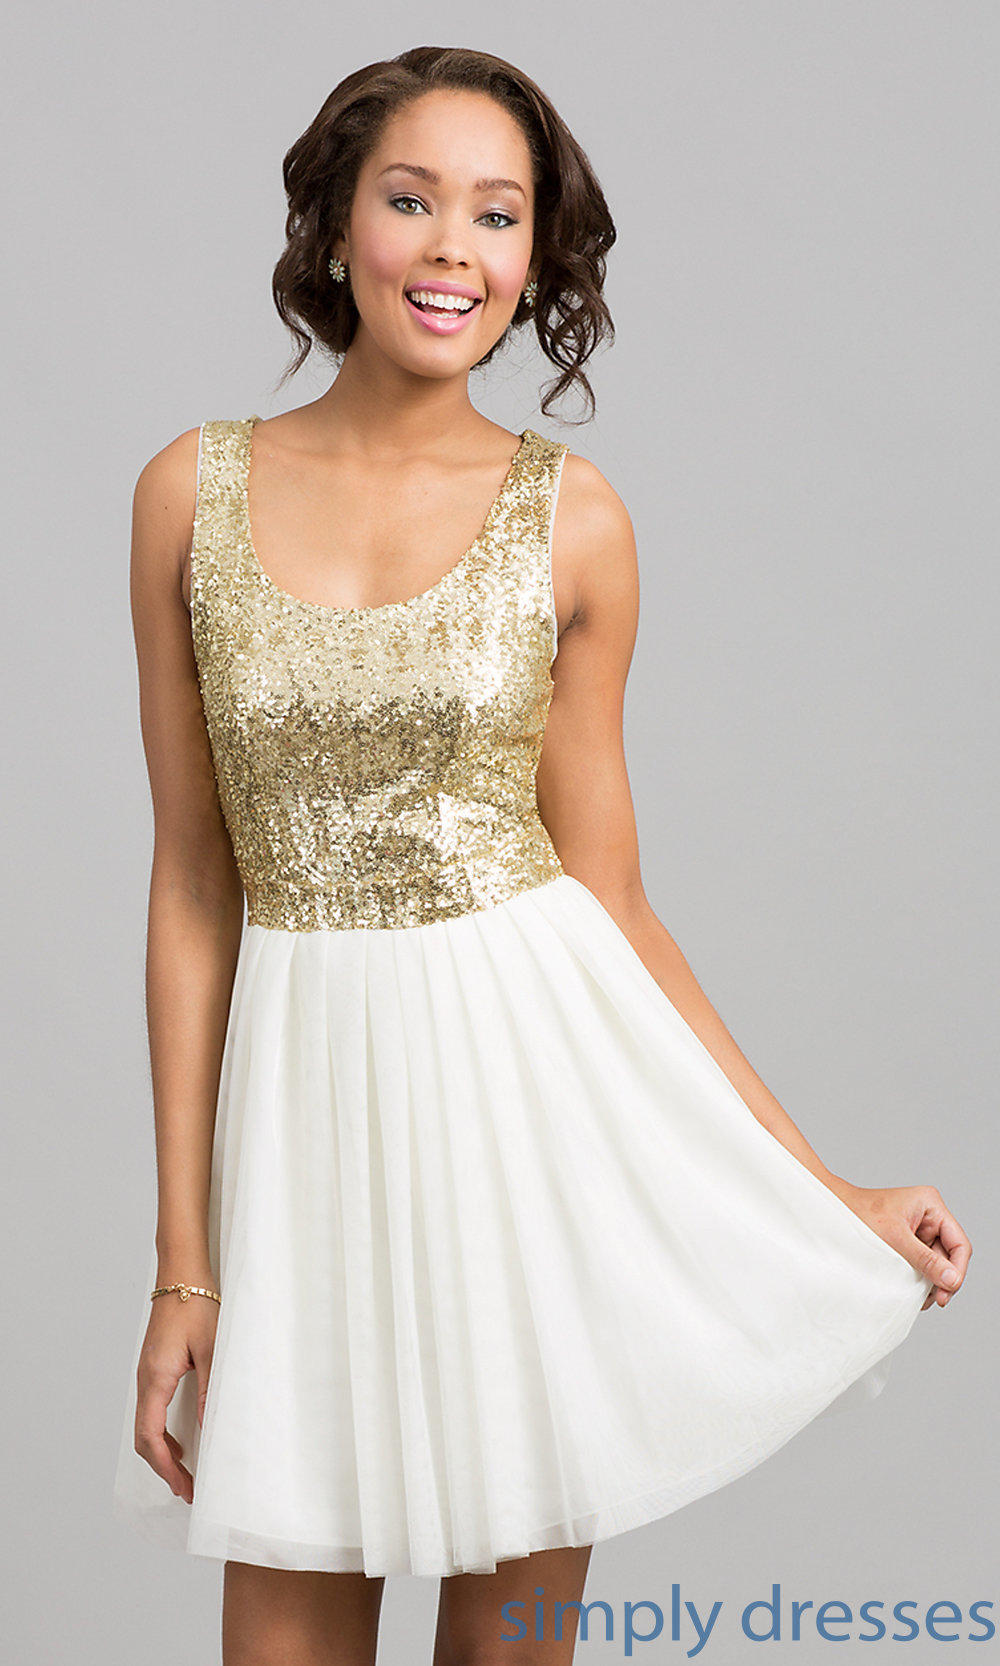 White Sparkly Short Dress - Fashion Outlet Review